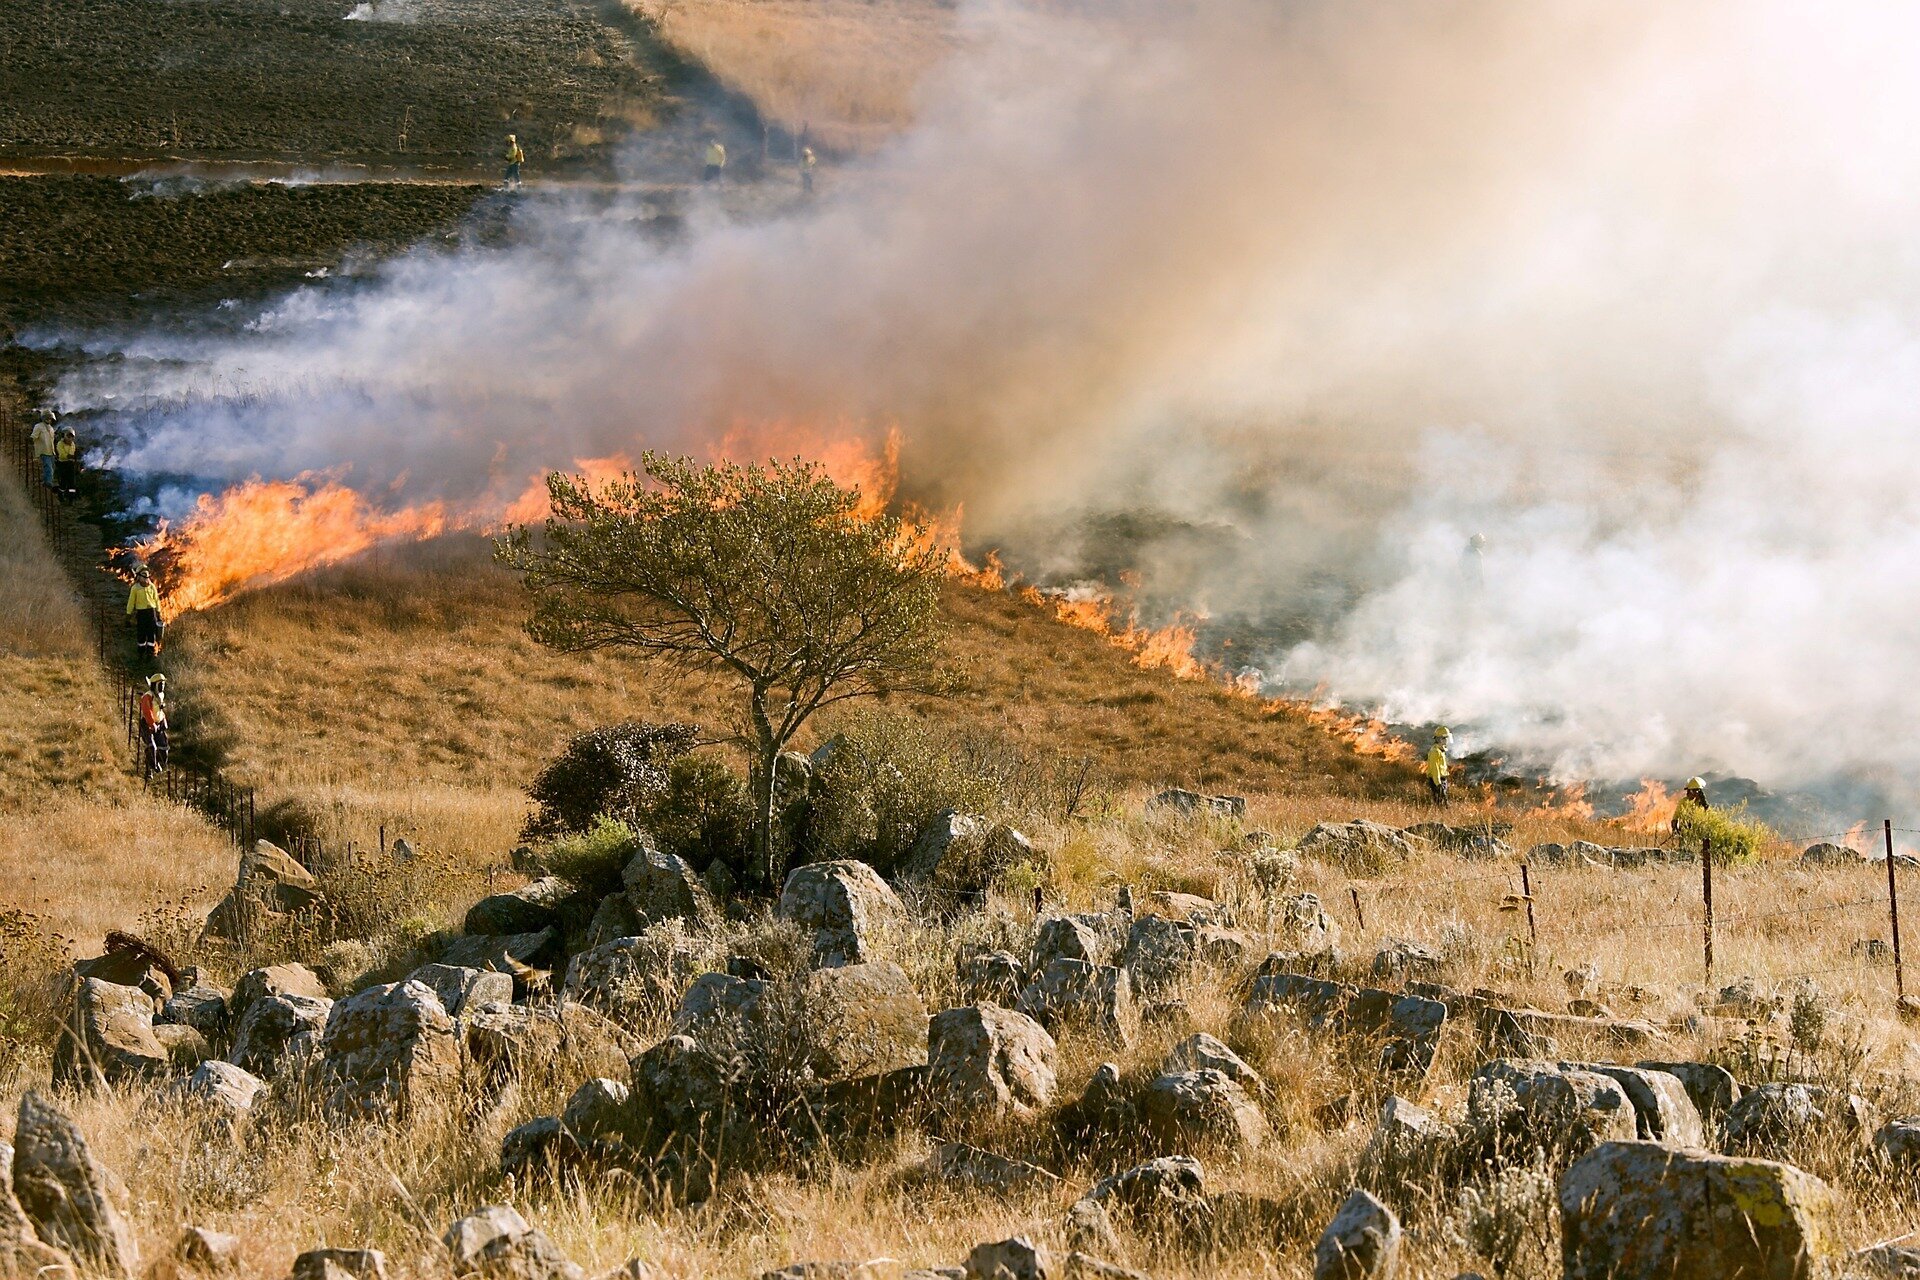 Wildfires in South Africa are set to increase: How legal action can help the country adapt better to climate change